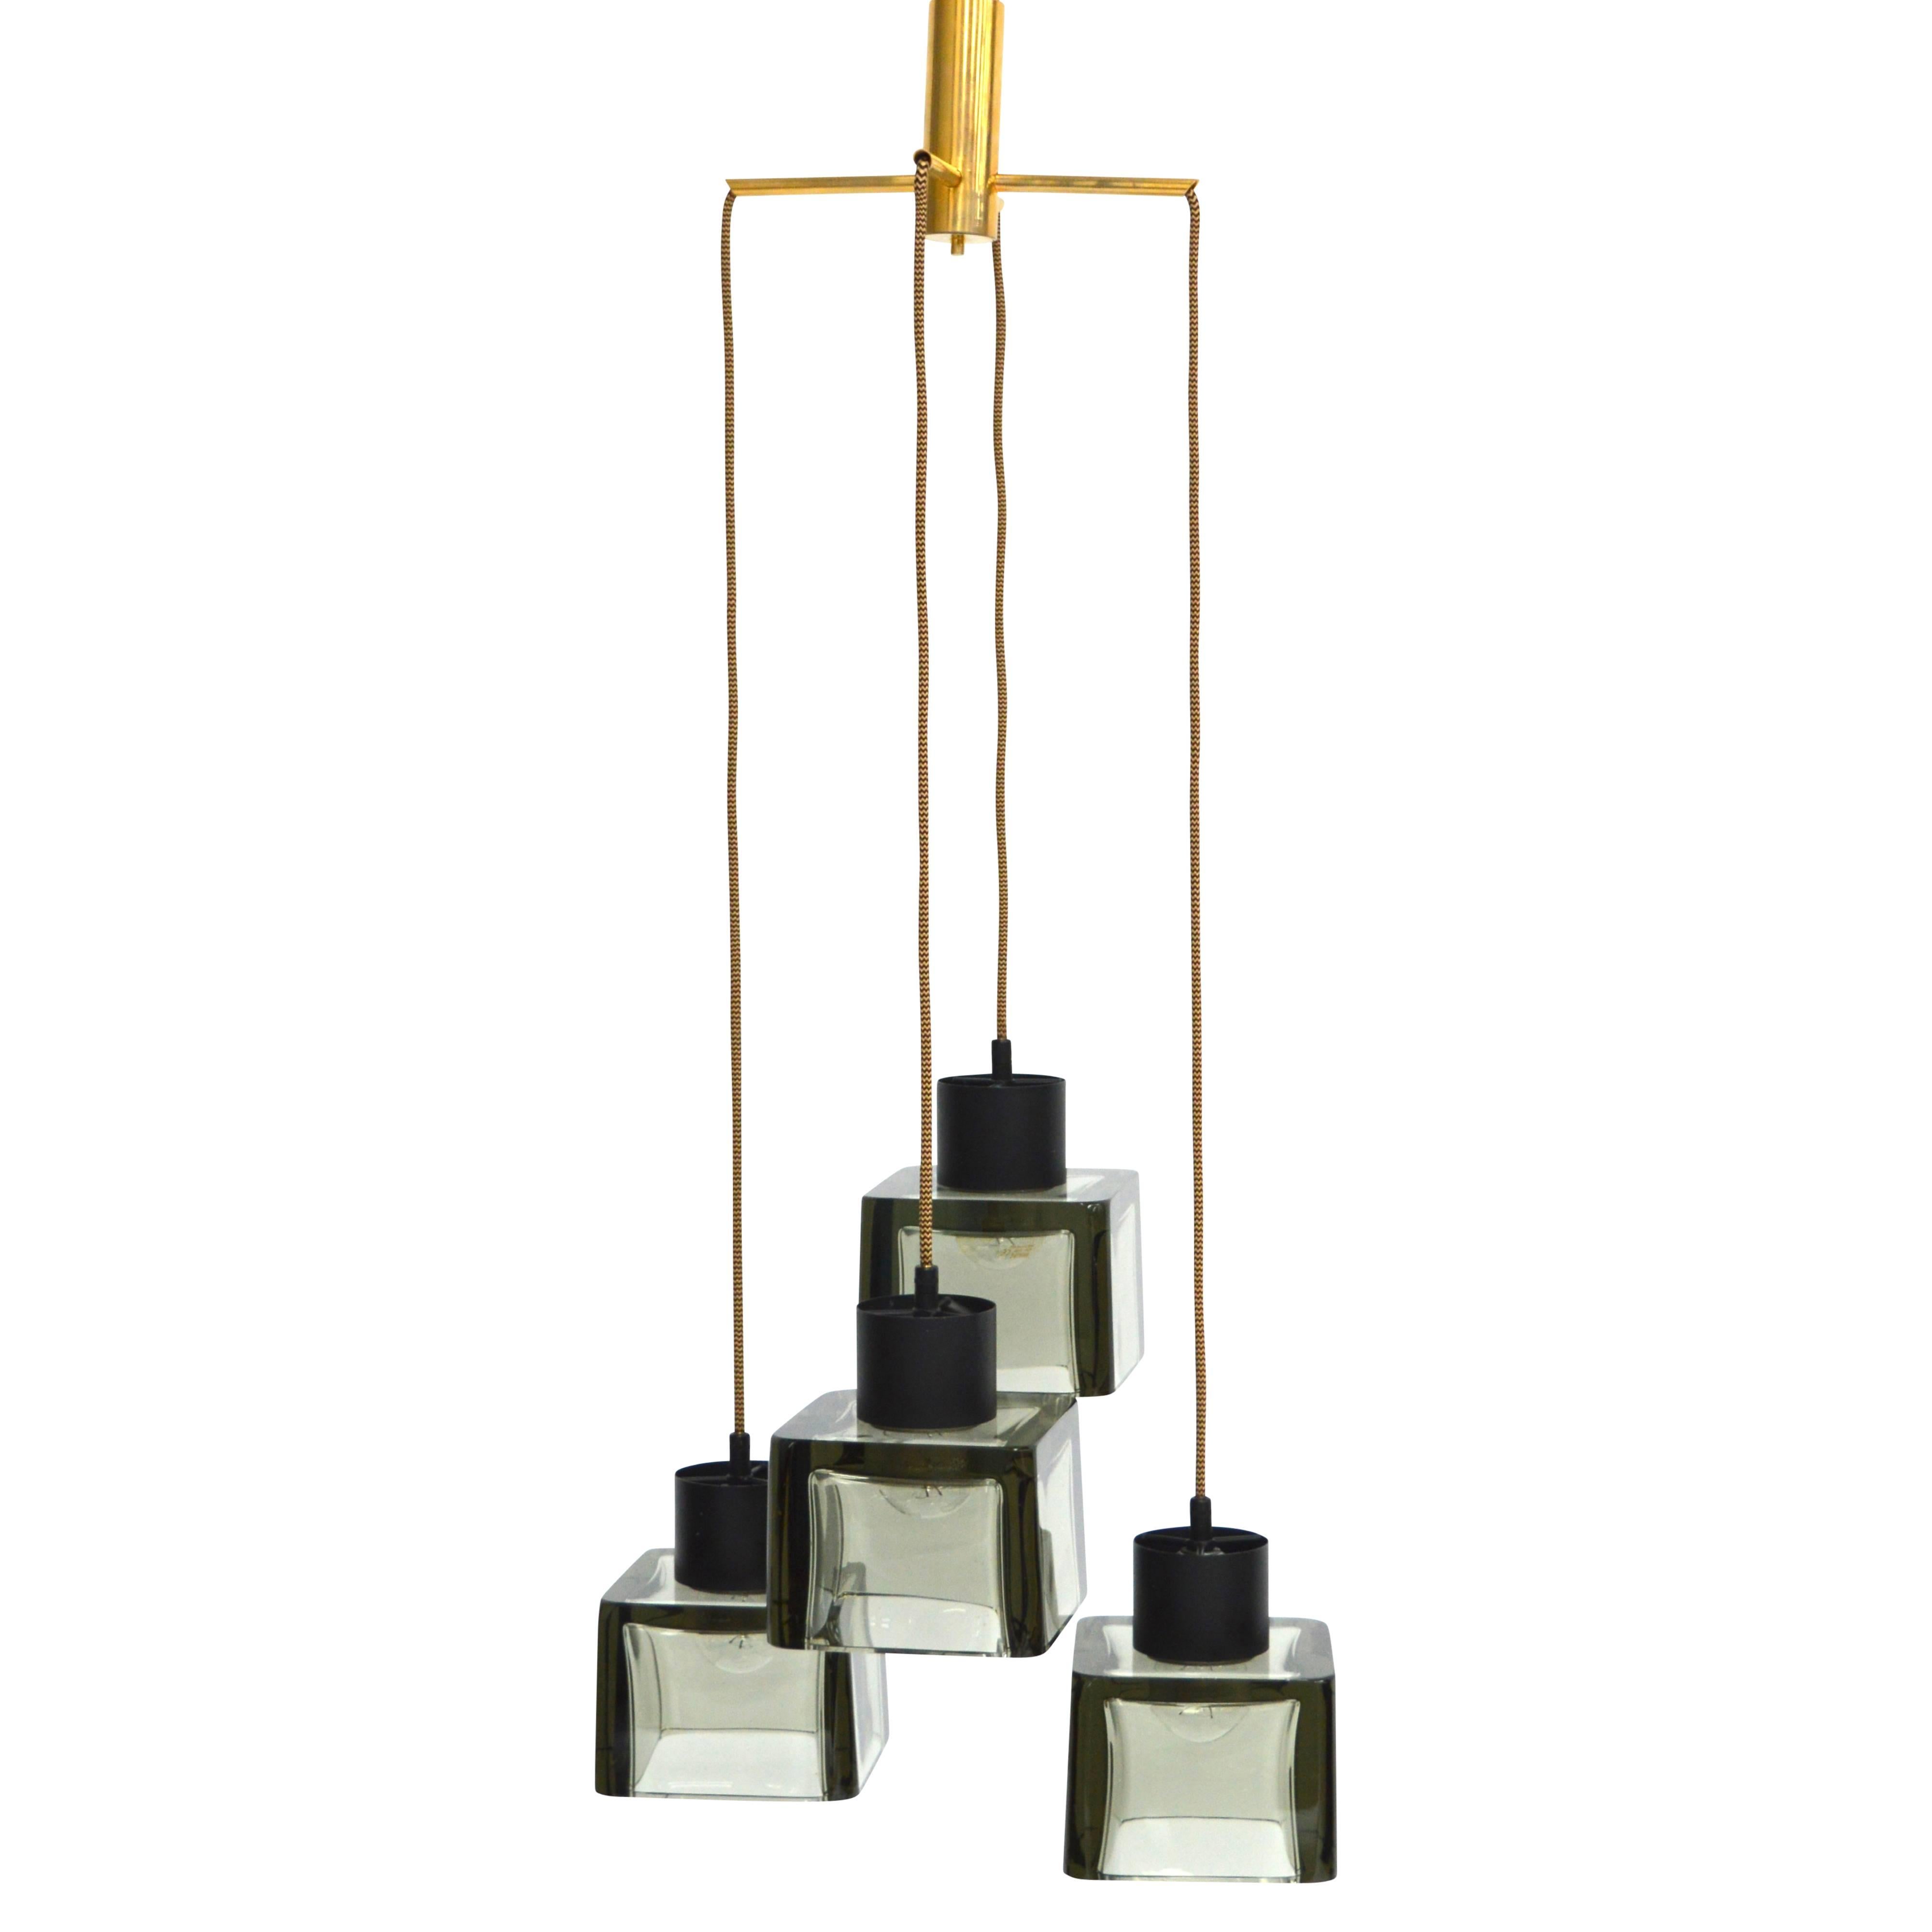 Rare four cube pendant lamp by Flavio Poli for Seguso, Italy, 1950s.
In excellent condition.
The cubes are made of very thick glass which gives an extraordinary effect.
All the wires have been replaced with beautiful new wiring with a gorgeous